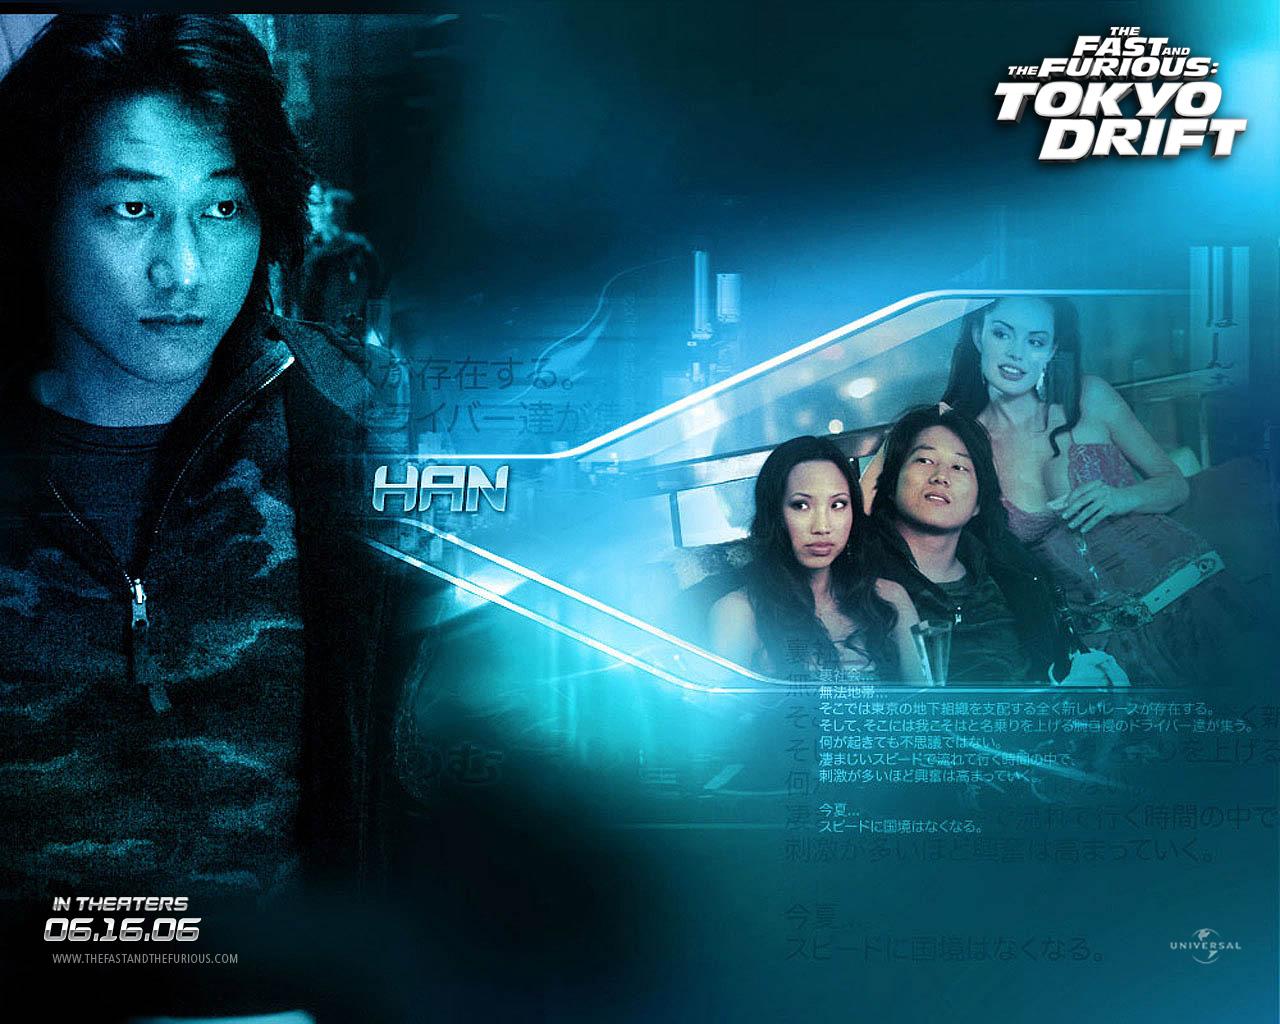 Sung Kang Kang in The Fast and the Furious Tokyo Drift